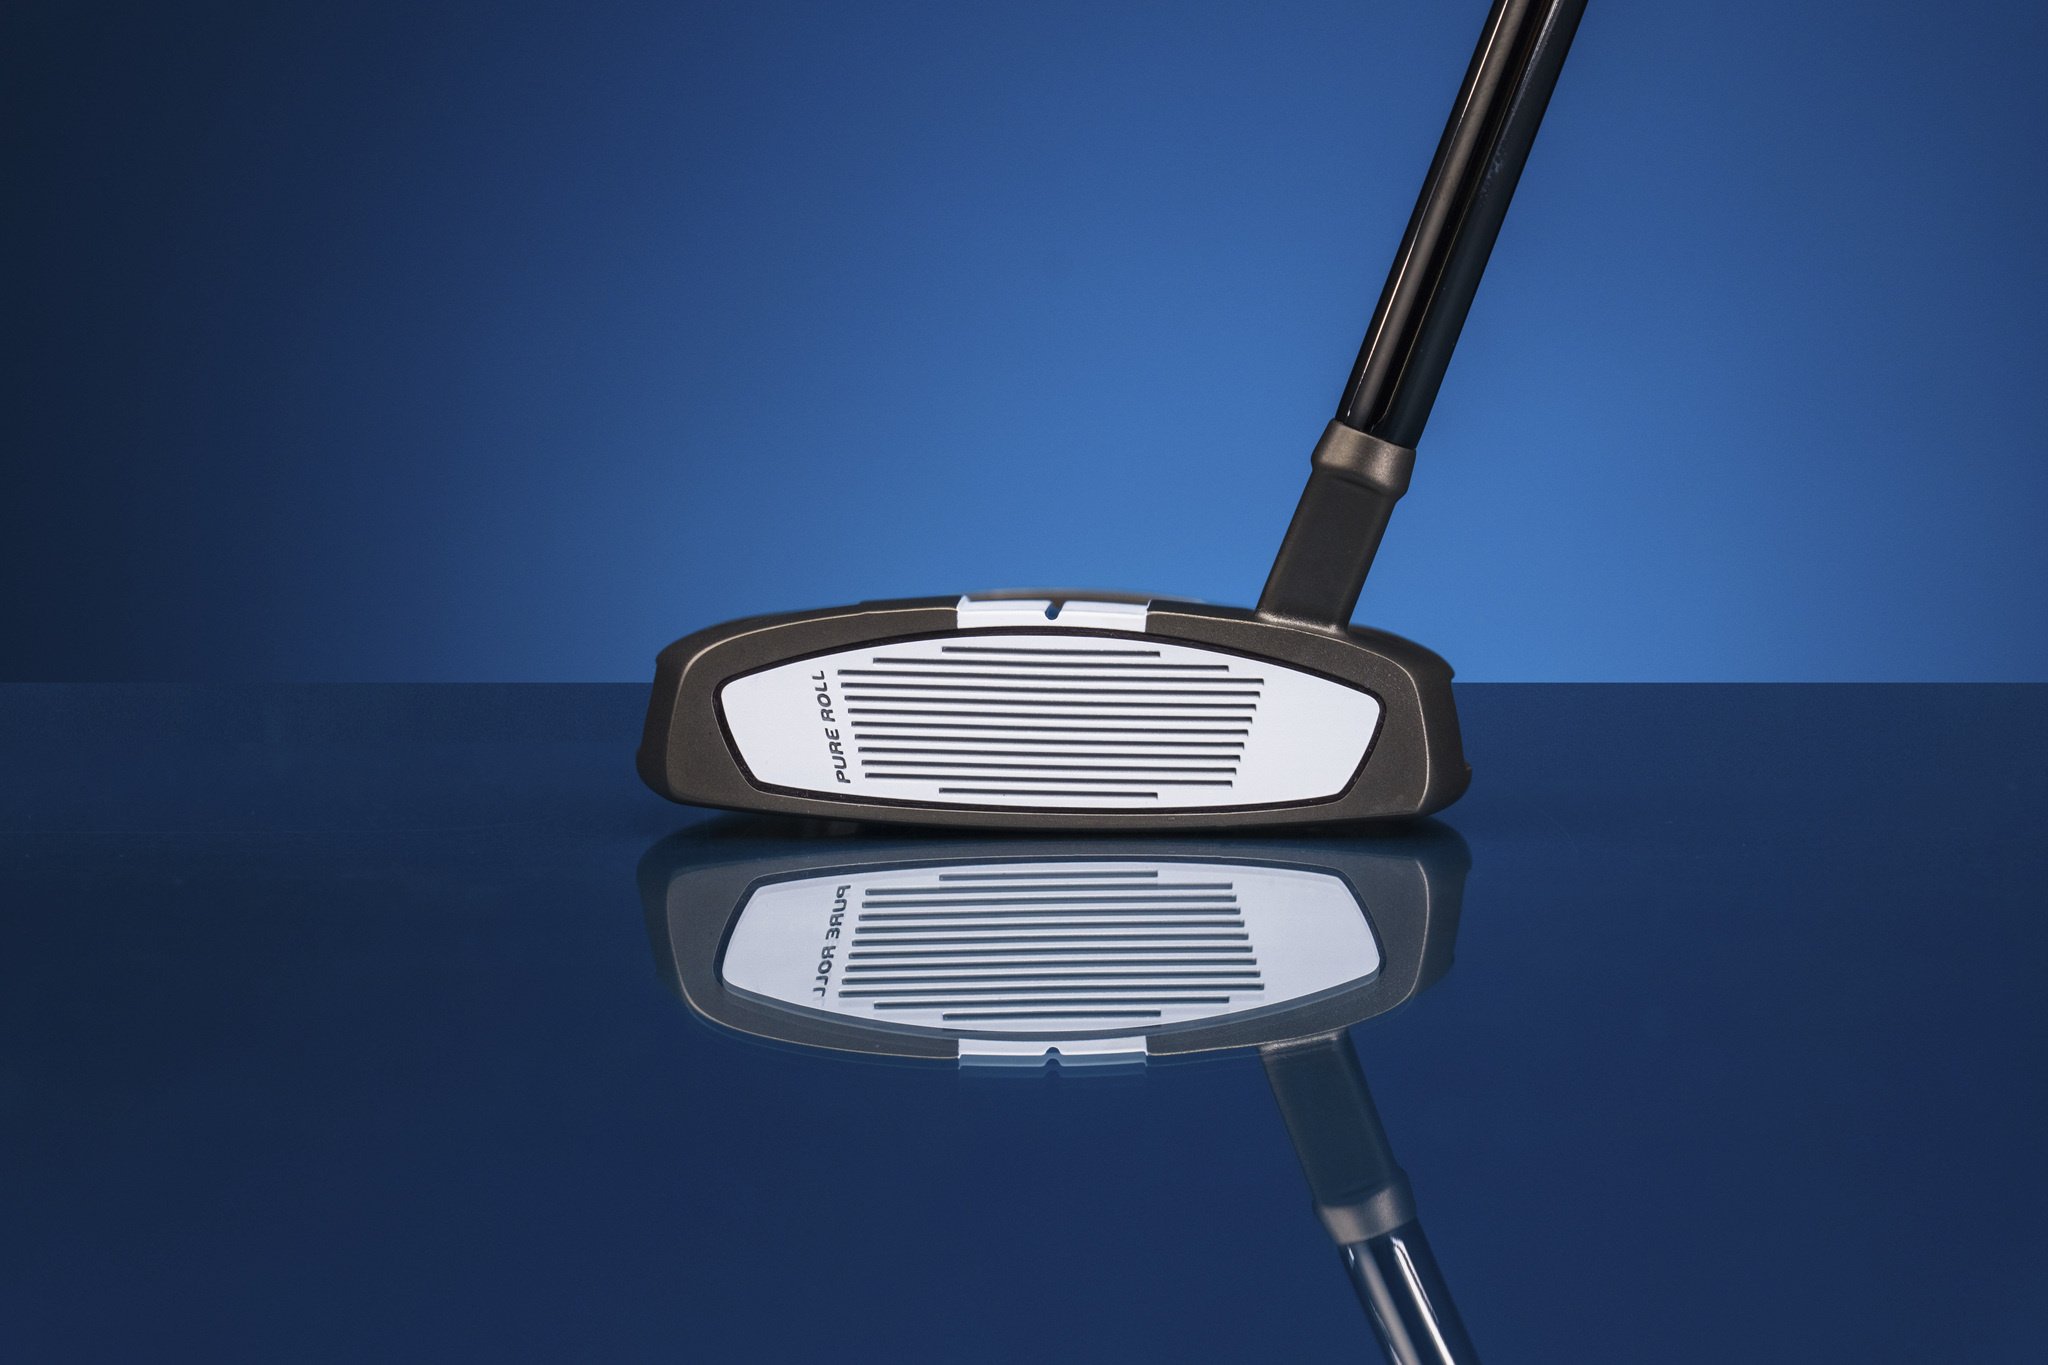 Putter Face Inserts